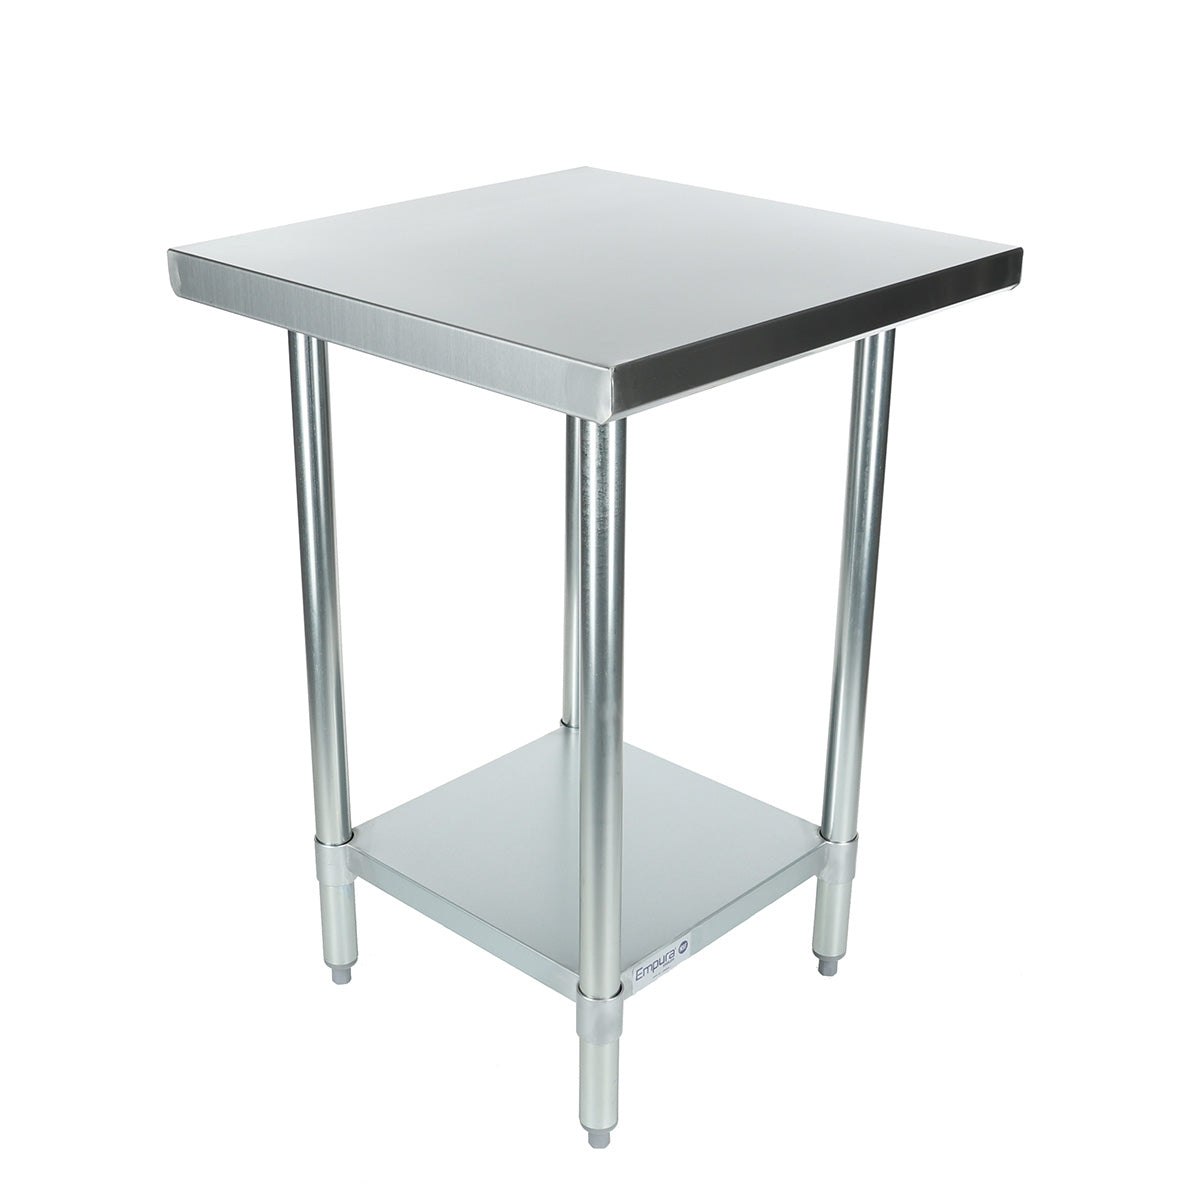 Empura 24" x 24" 18-Gauge 430 Stainless Steel Commercial Work Table with Flat Top Galvanized Legs and Undershelf